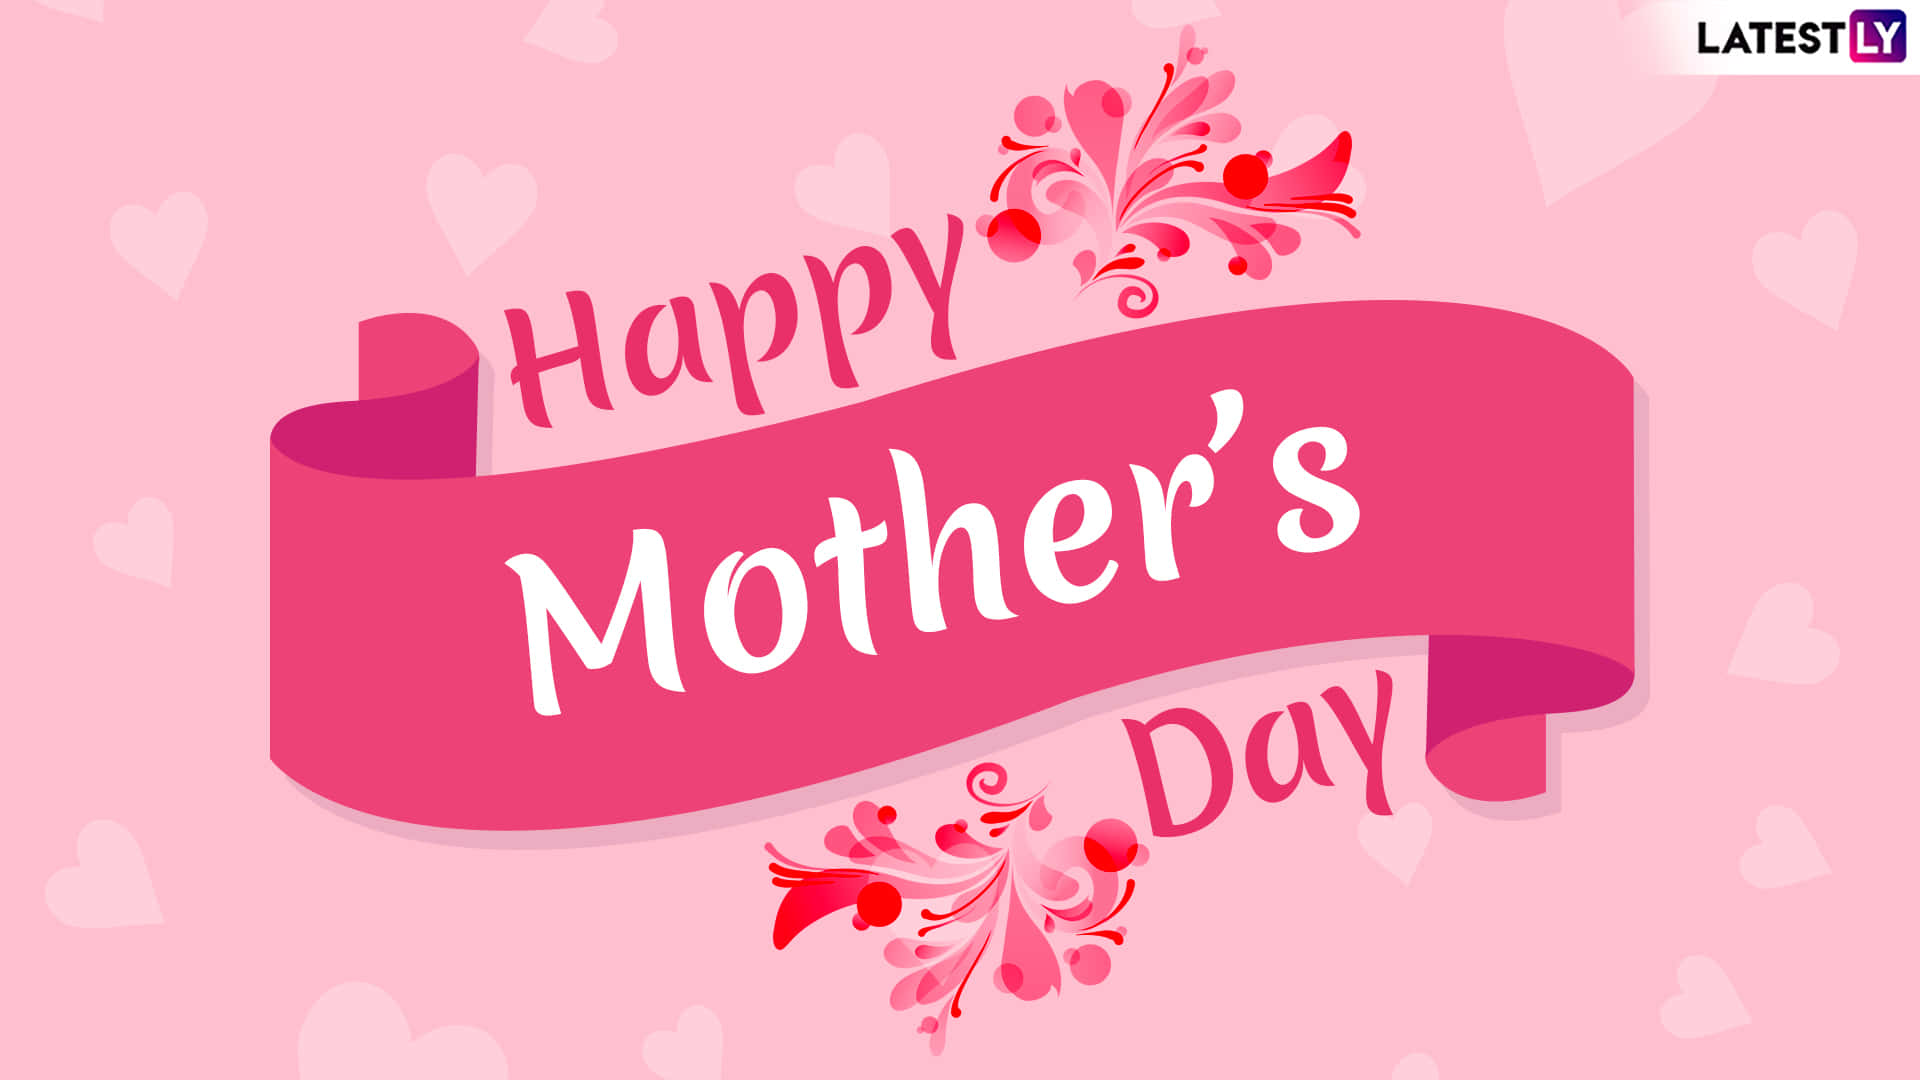 Celebrate Mother's Day with Love! Wallpaper